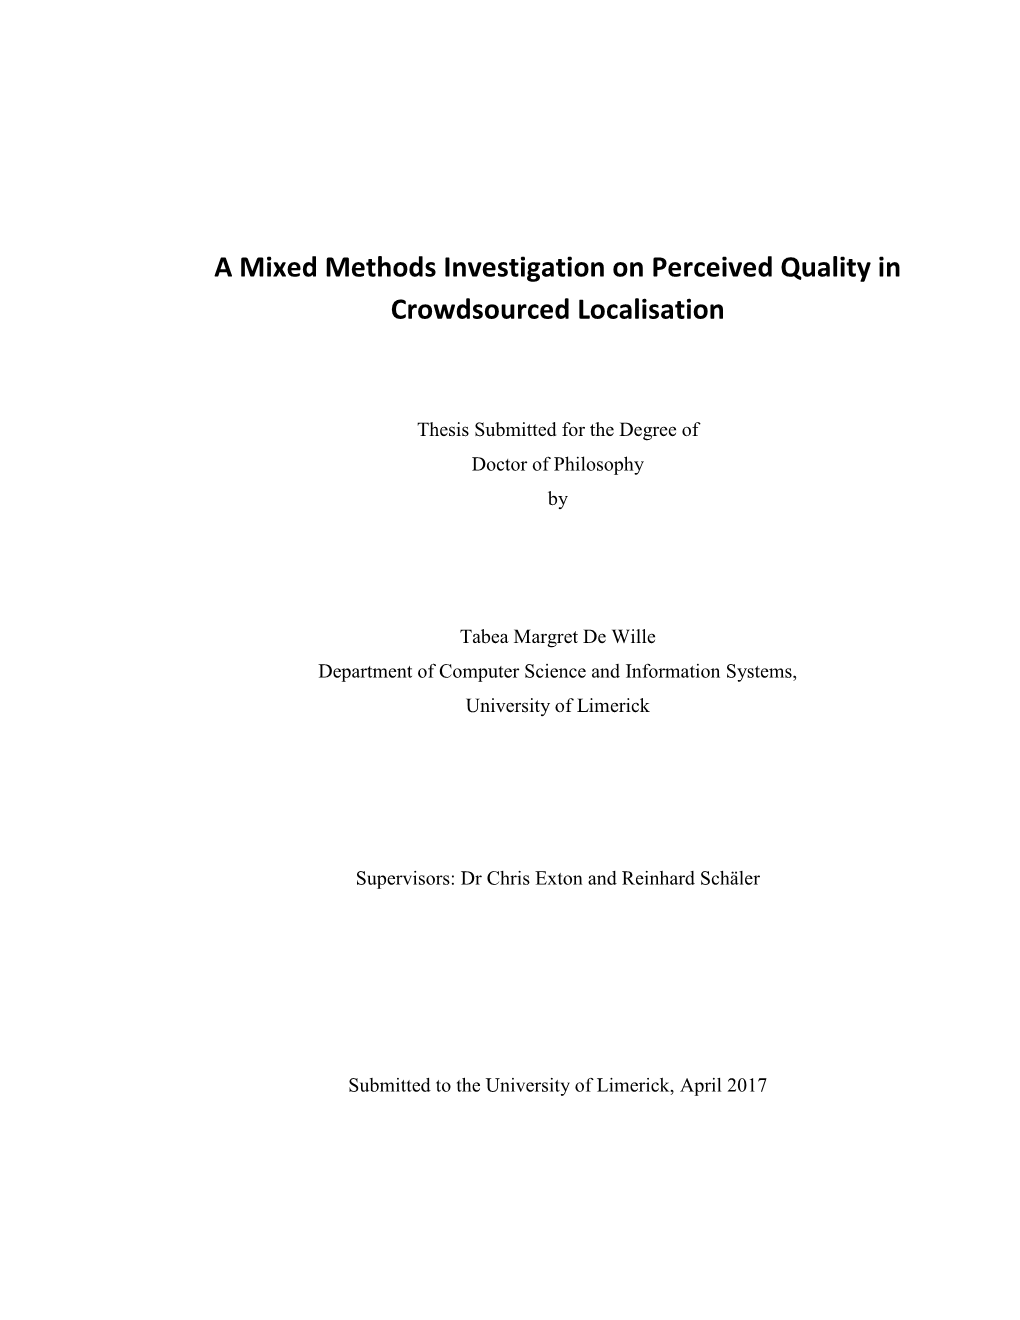 A Mixed Methods Investigation on Perceived Quality in Crowdsourced Localisation